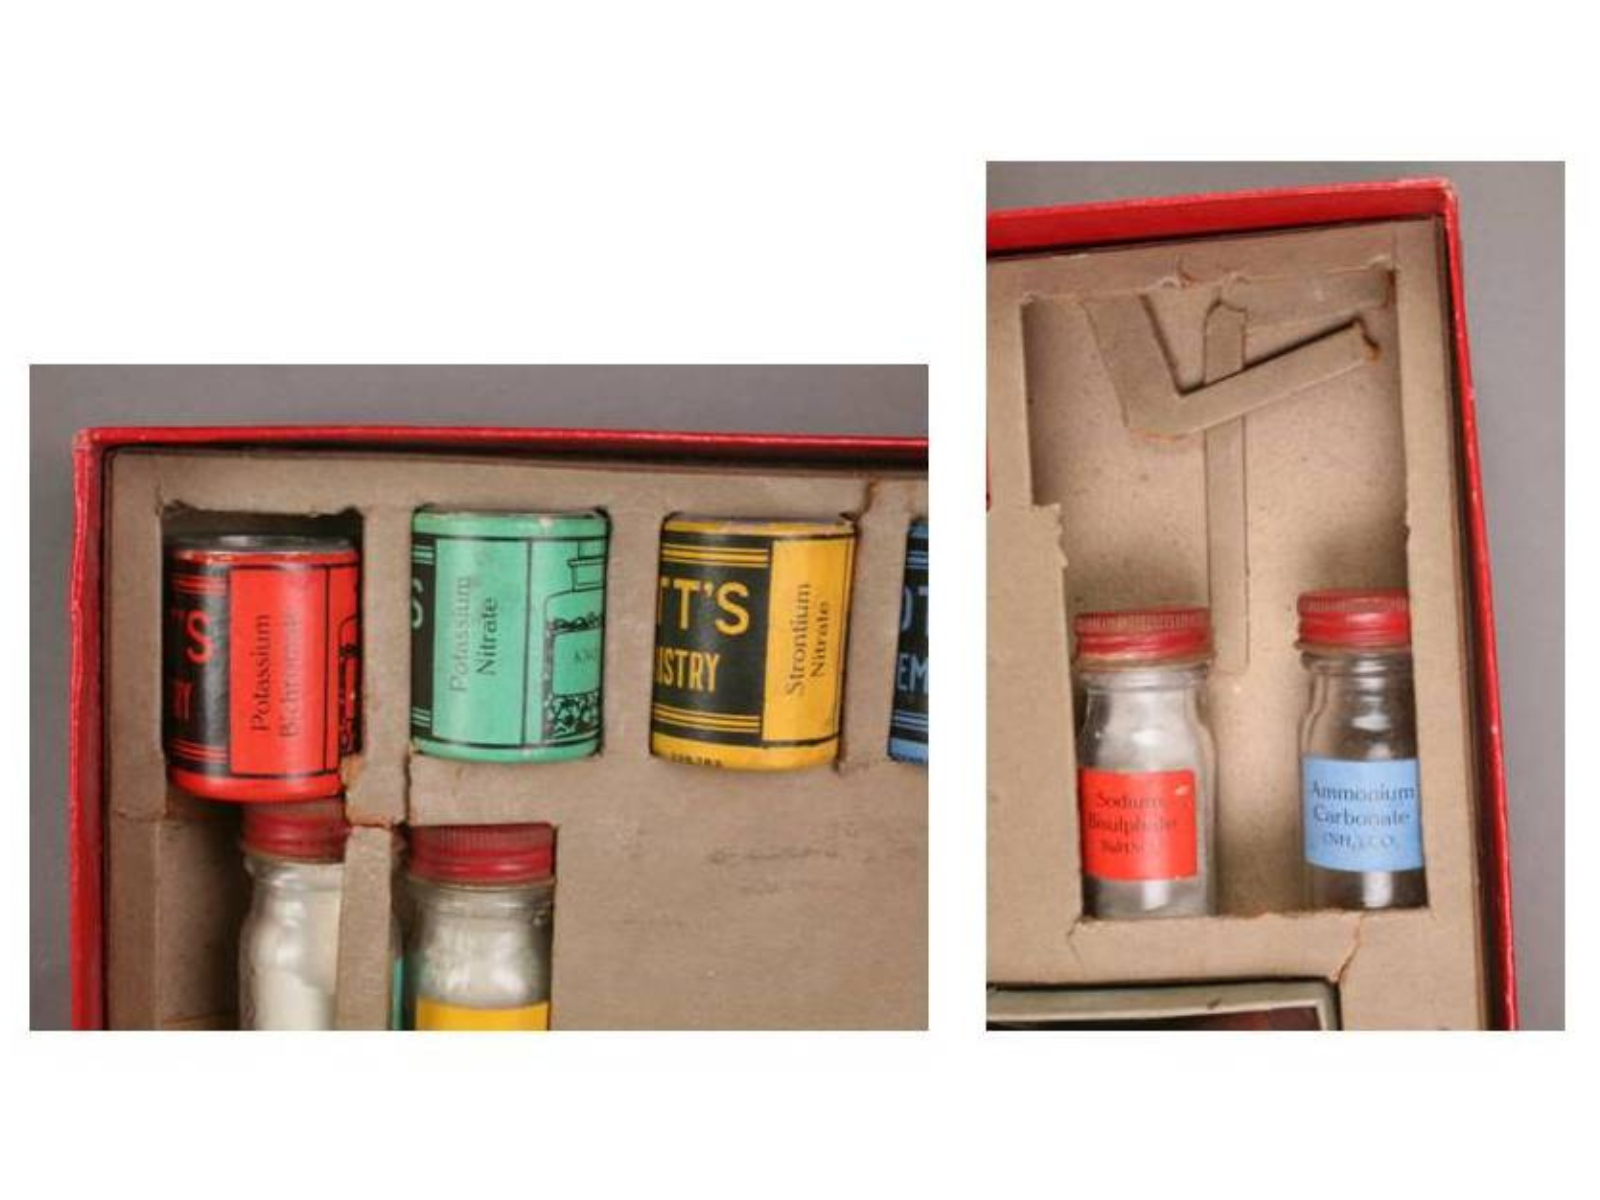 Two photos side-by-side. On the left, a detail image showing the tears in the upper left corner of the chemistry set’s insert. On the right, a detail image showing damage to the insert in the upper right corner of the chemistry set insert.